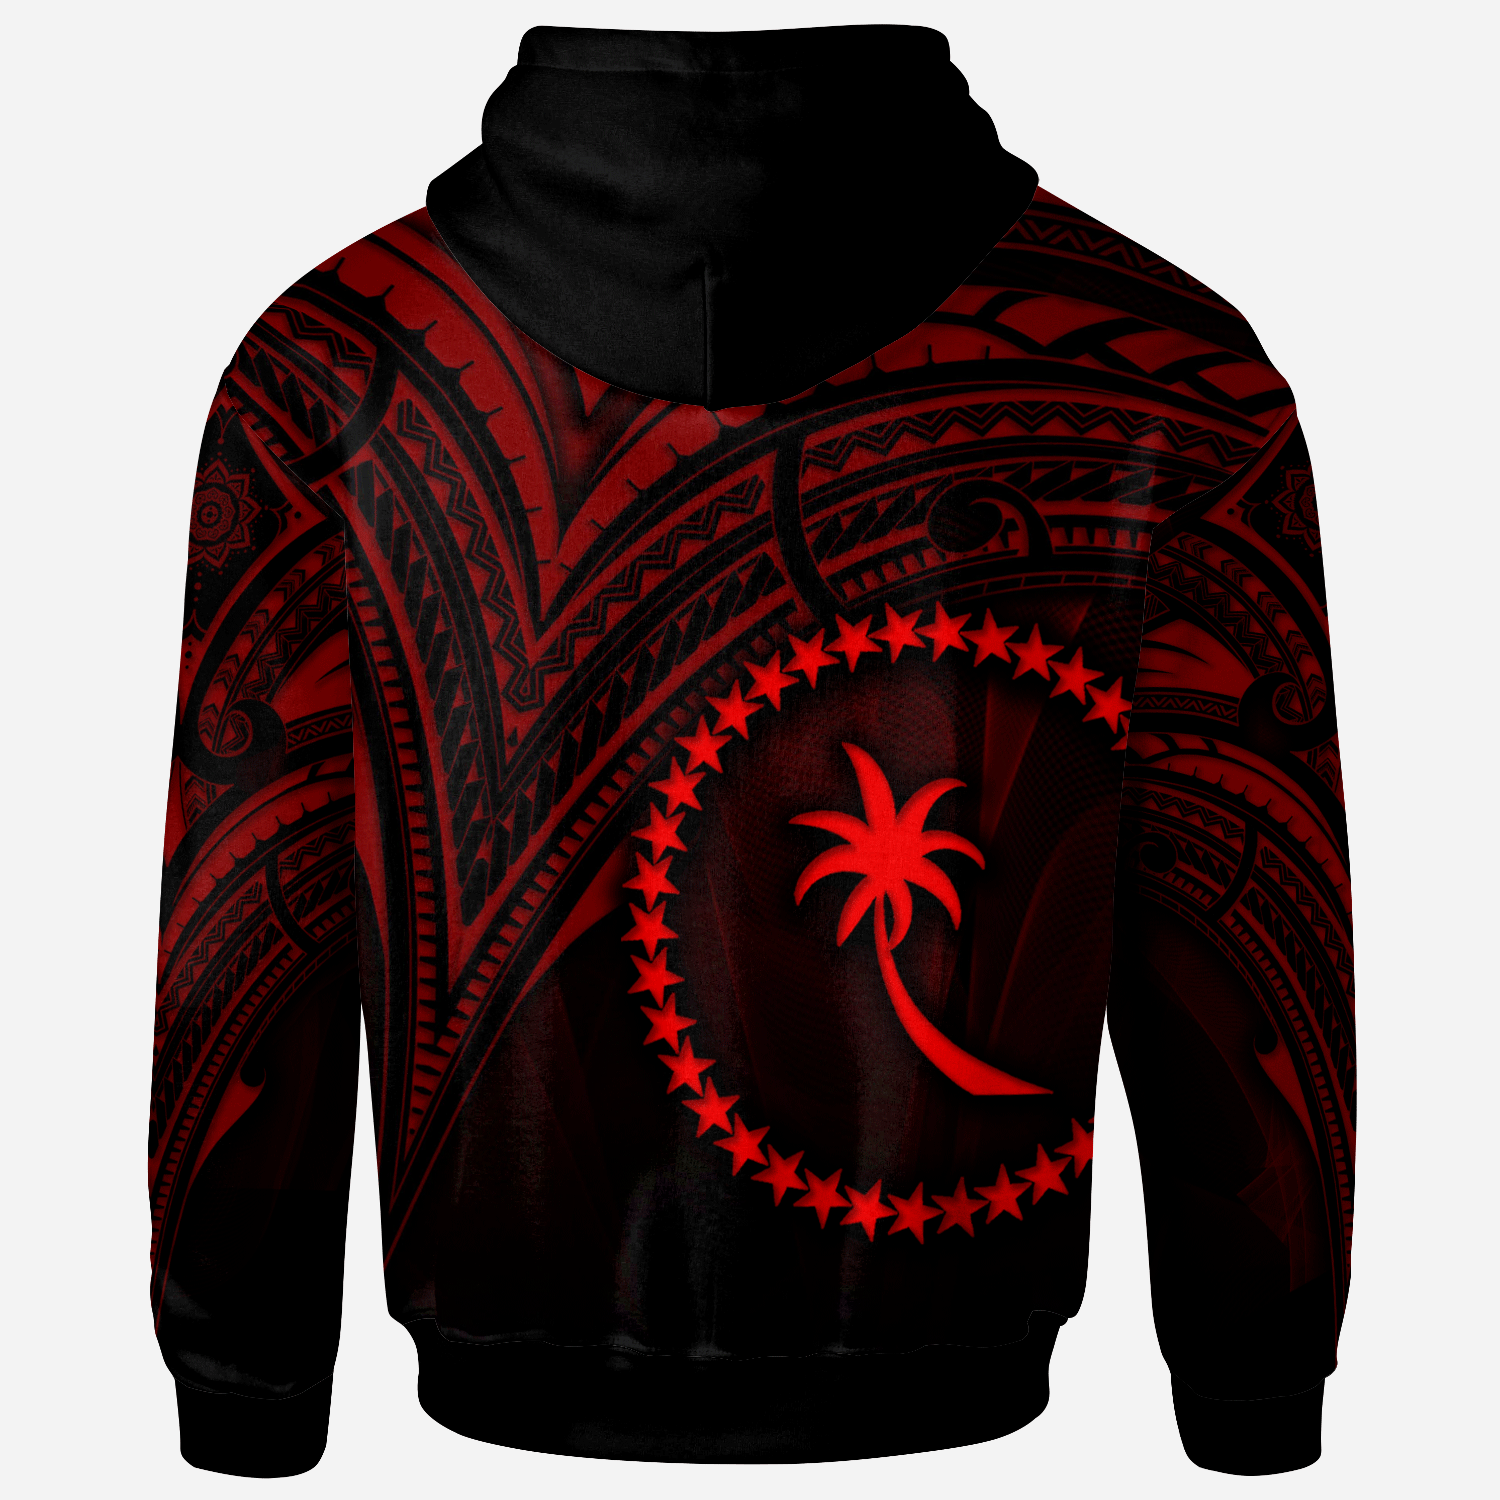 Chuuk State Hoodie Red Color Cross Style